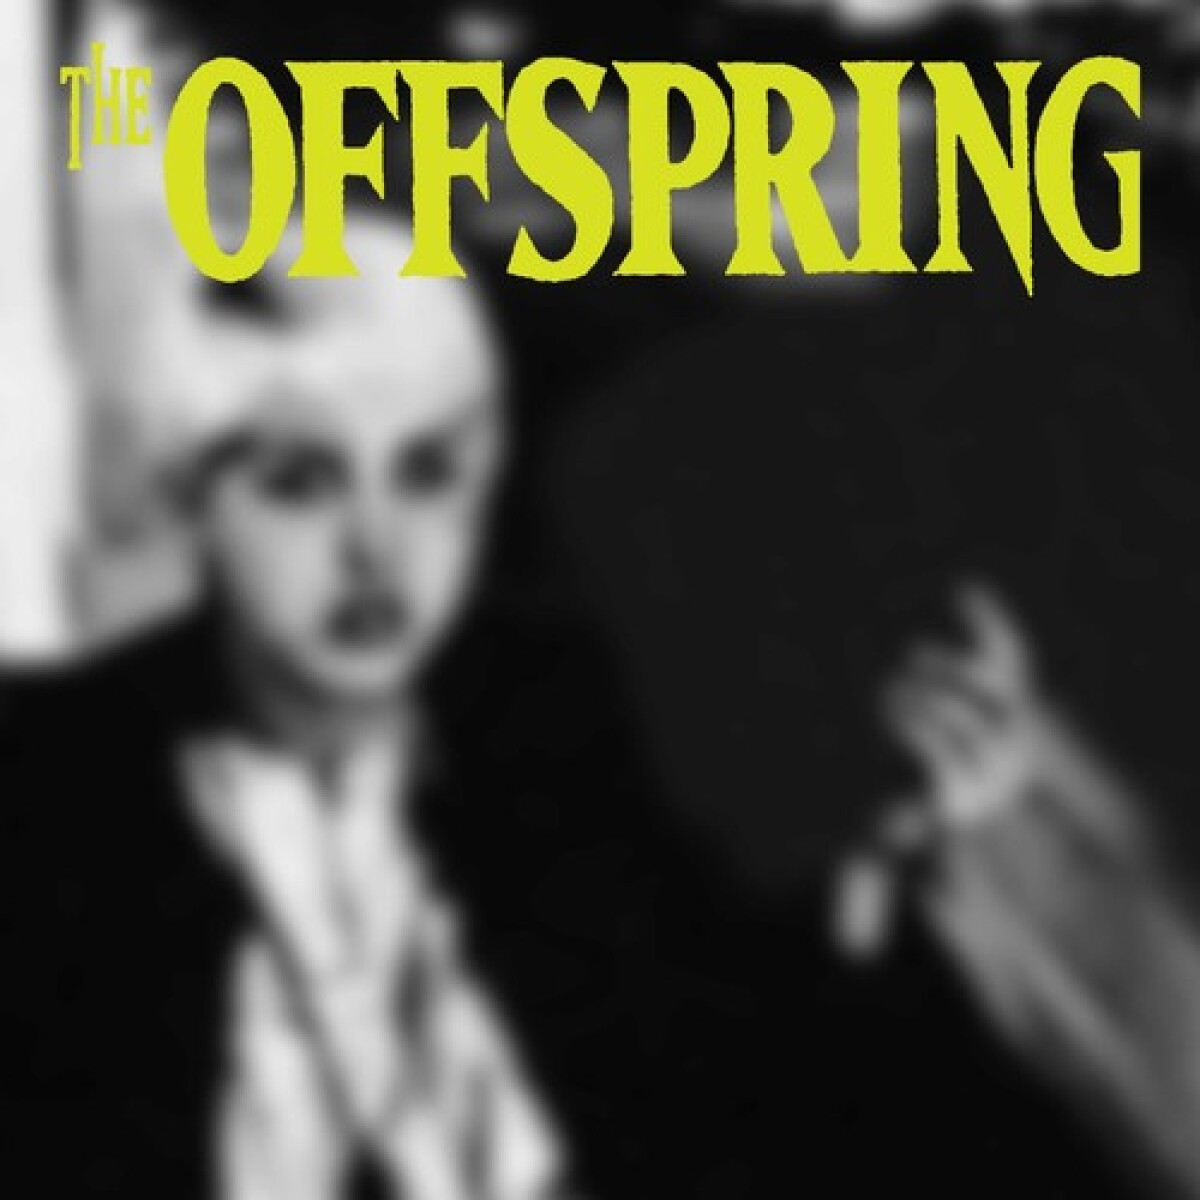 The Offspring-the Offspring - Vinilo 